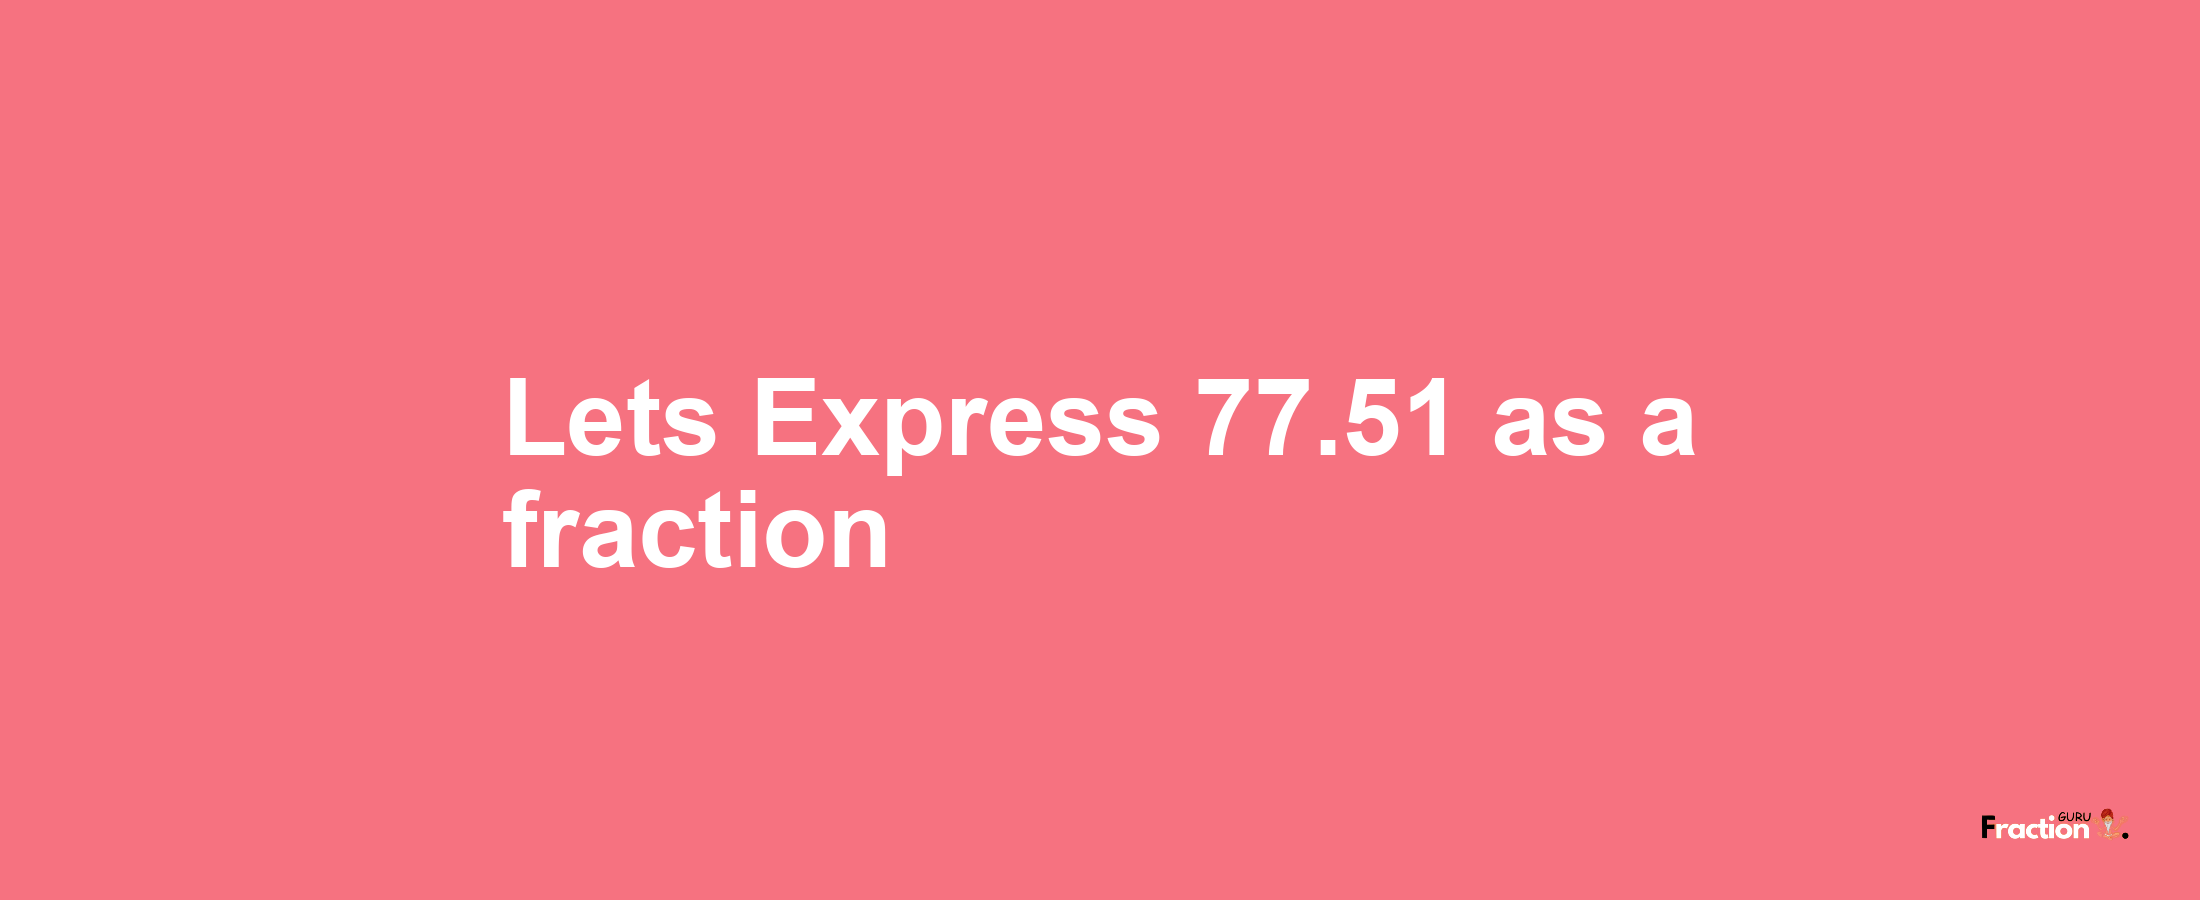 Lets Express 77.51 as afraction